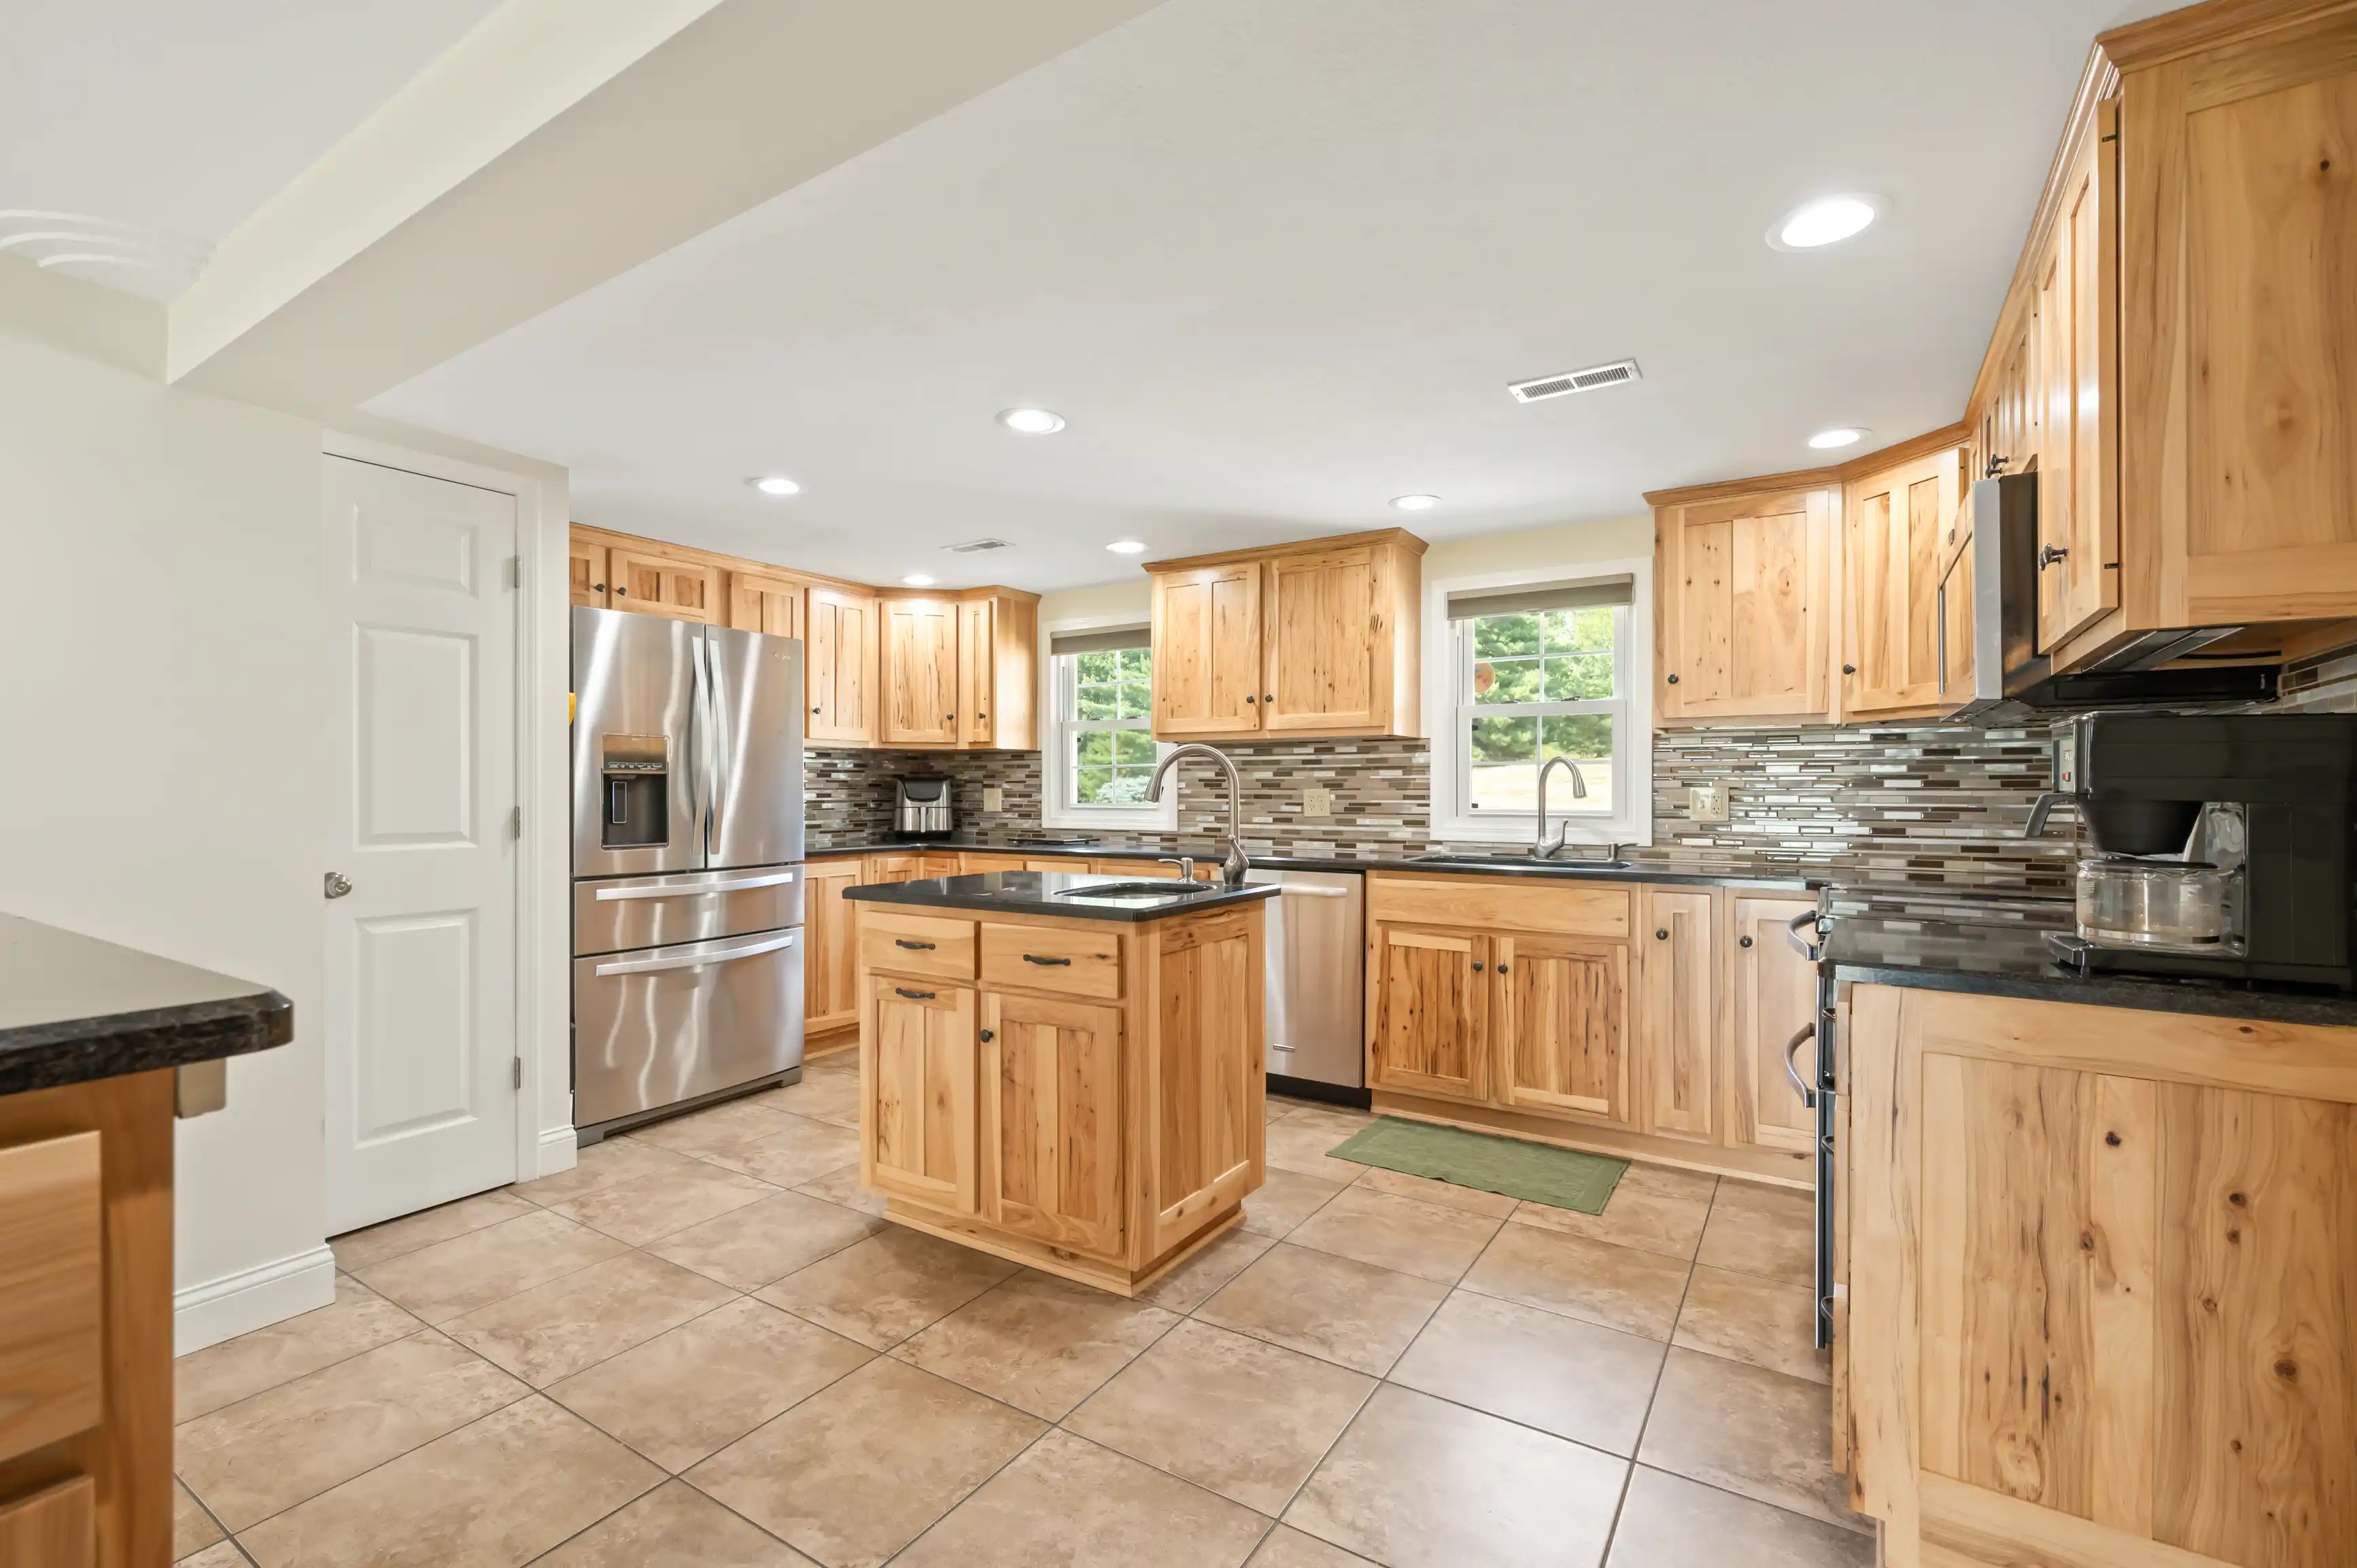 Spacious kitchen with natural wood cabinets, stainless steel appliances, and a stone tile backsplash.